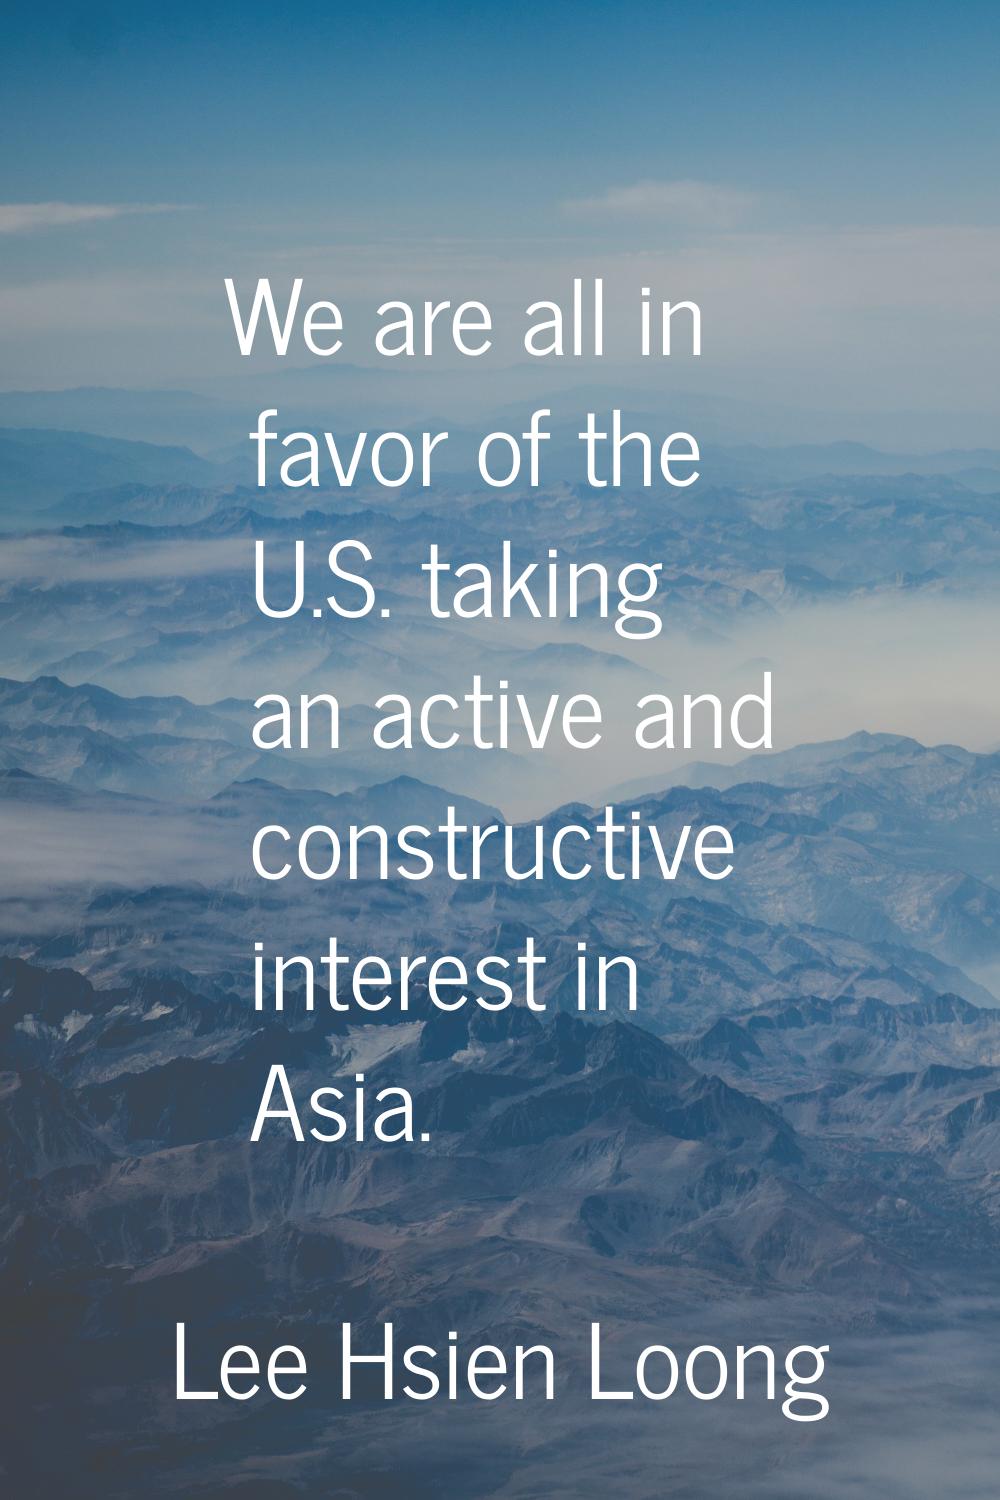 We are all in favor of the U.S. taking an active and constructive interest in Asia.